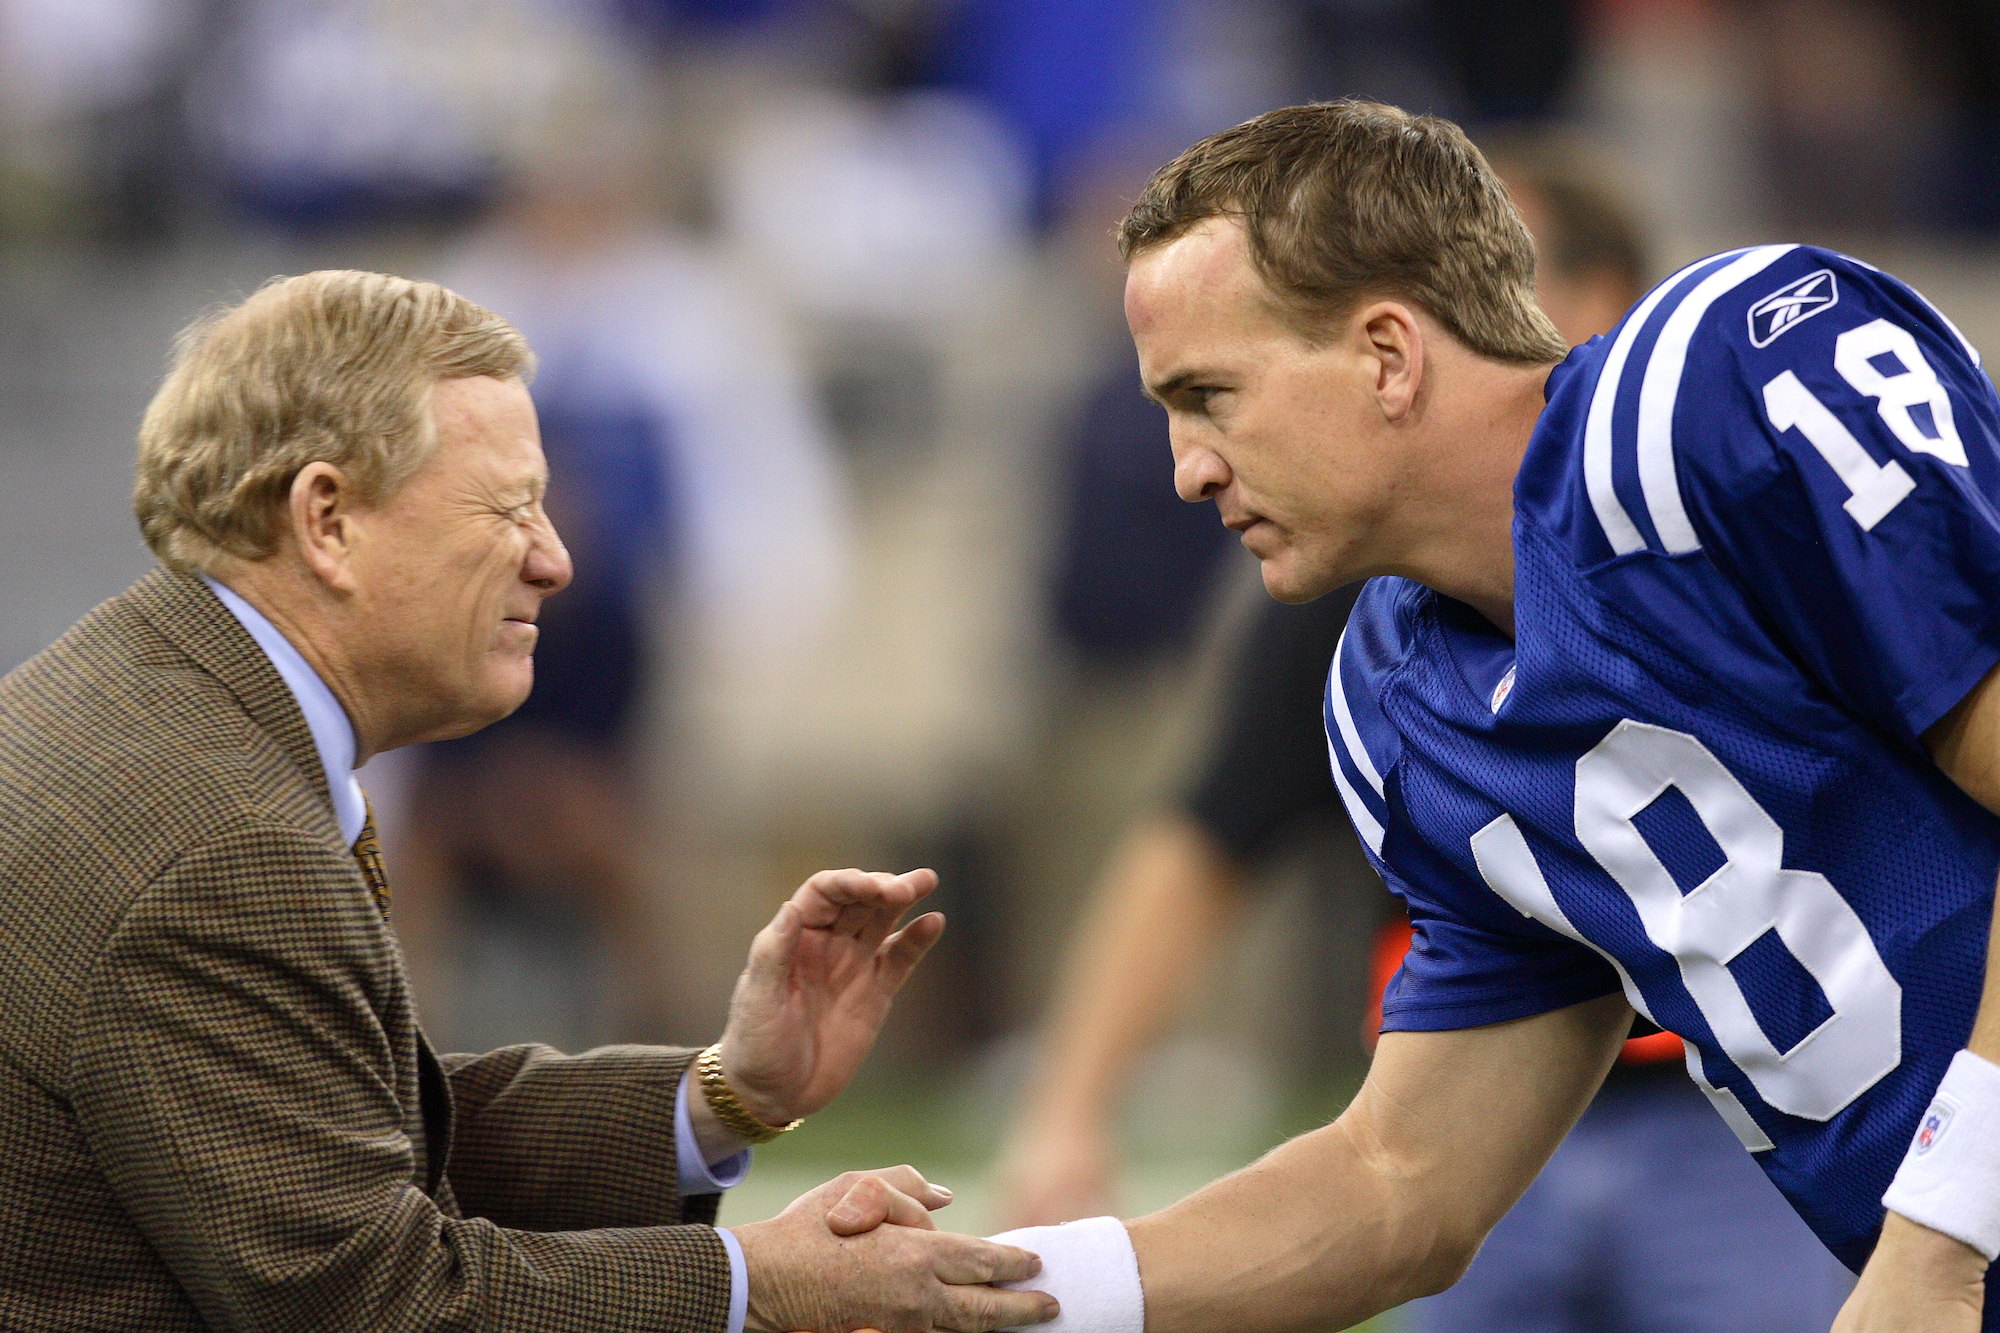 Before the 1998 NFL draft, Peyton Manning gave Bill Polian and the Indianapolis Colts a stern warning.